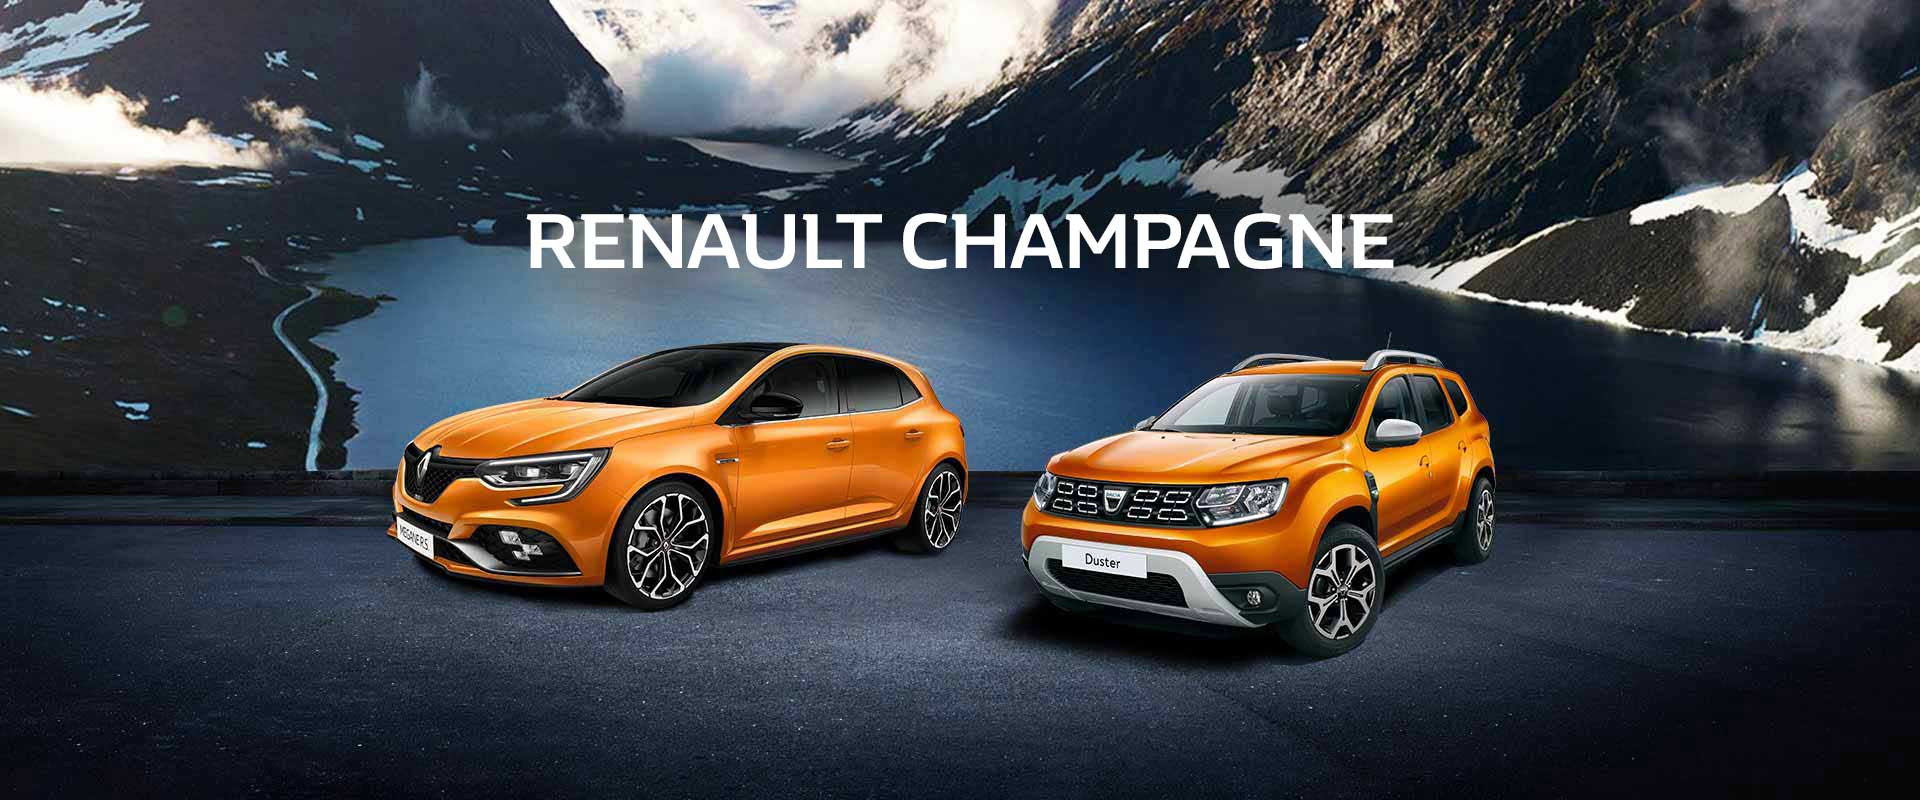 Renault Champagne